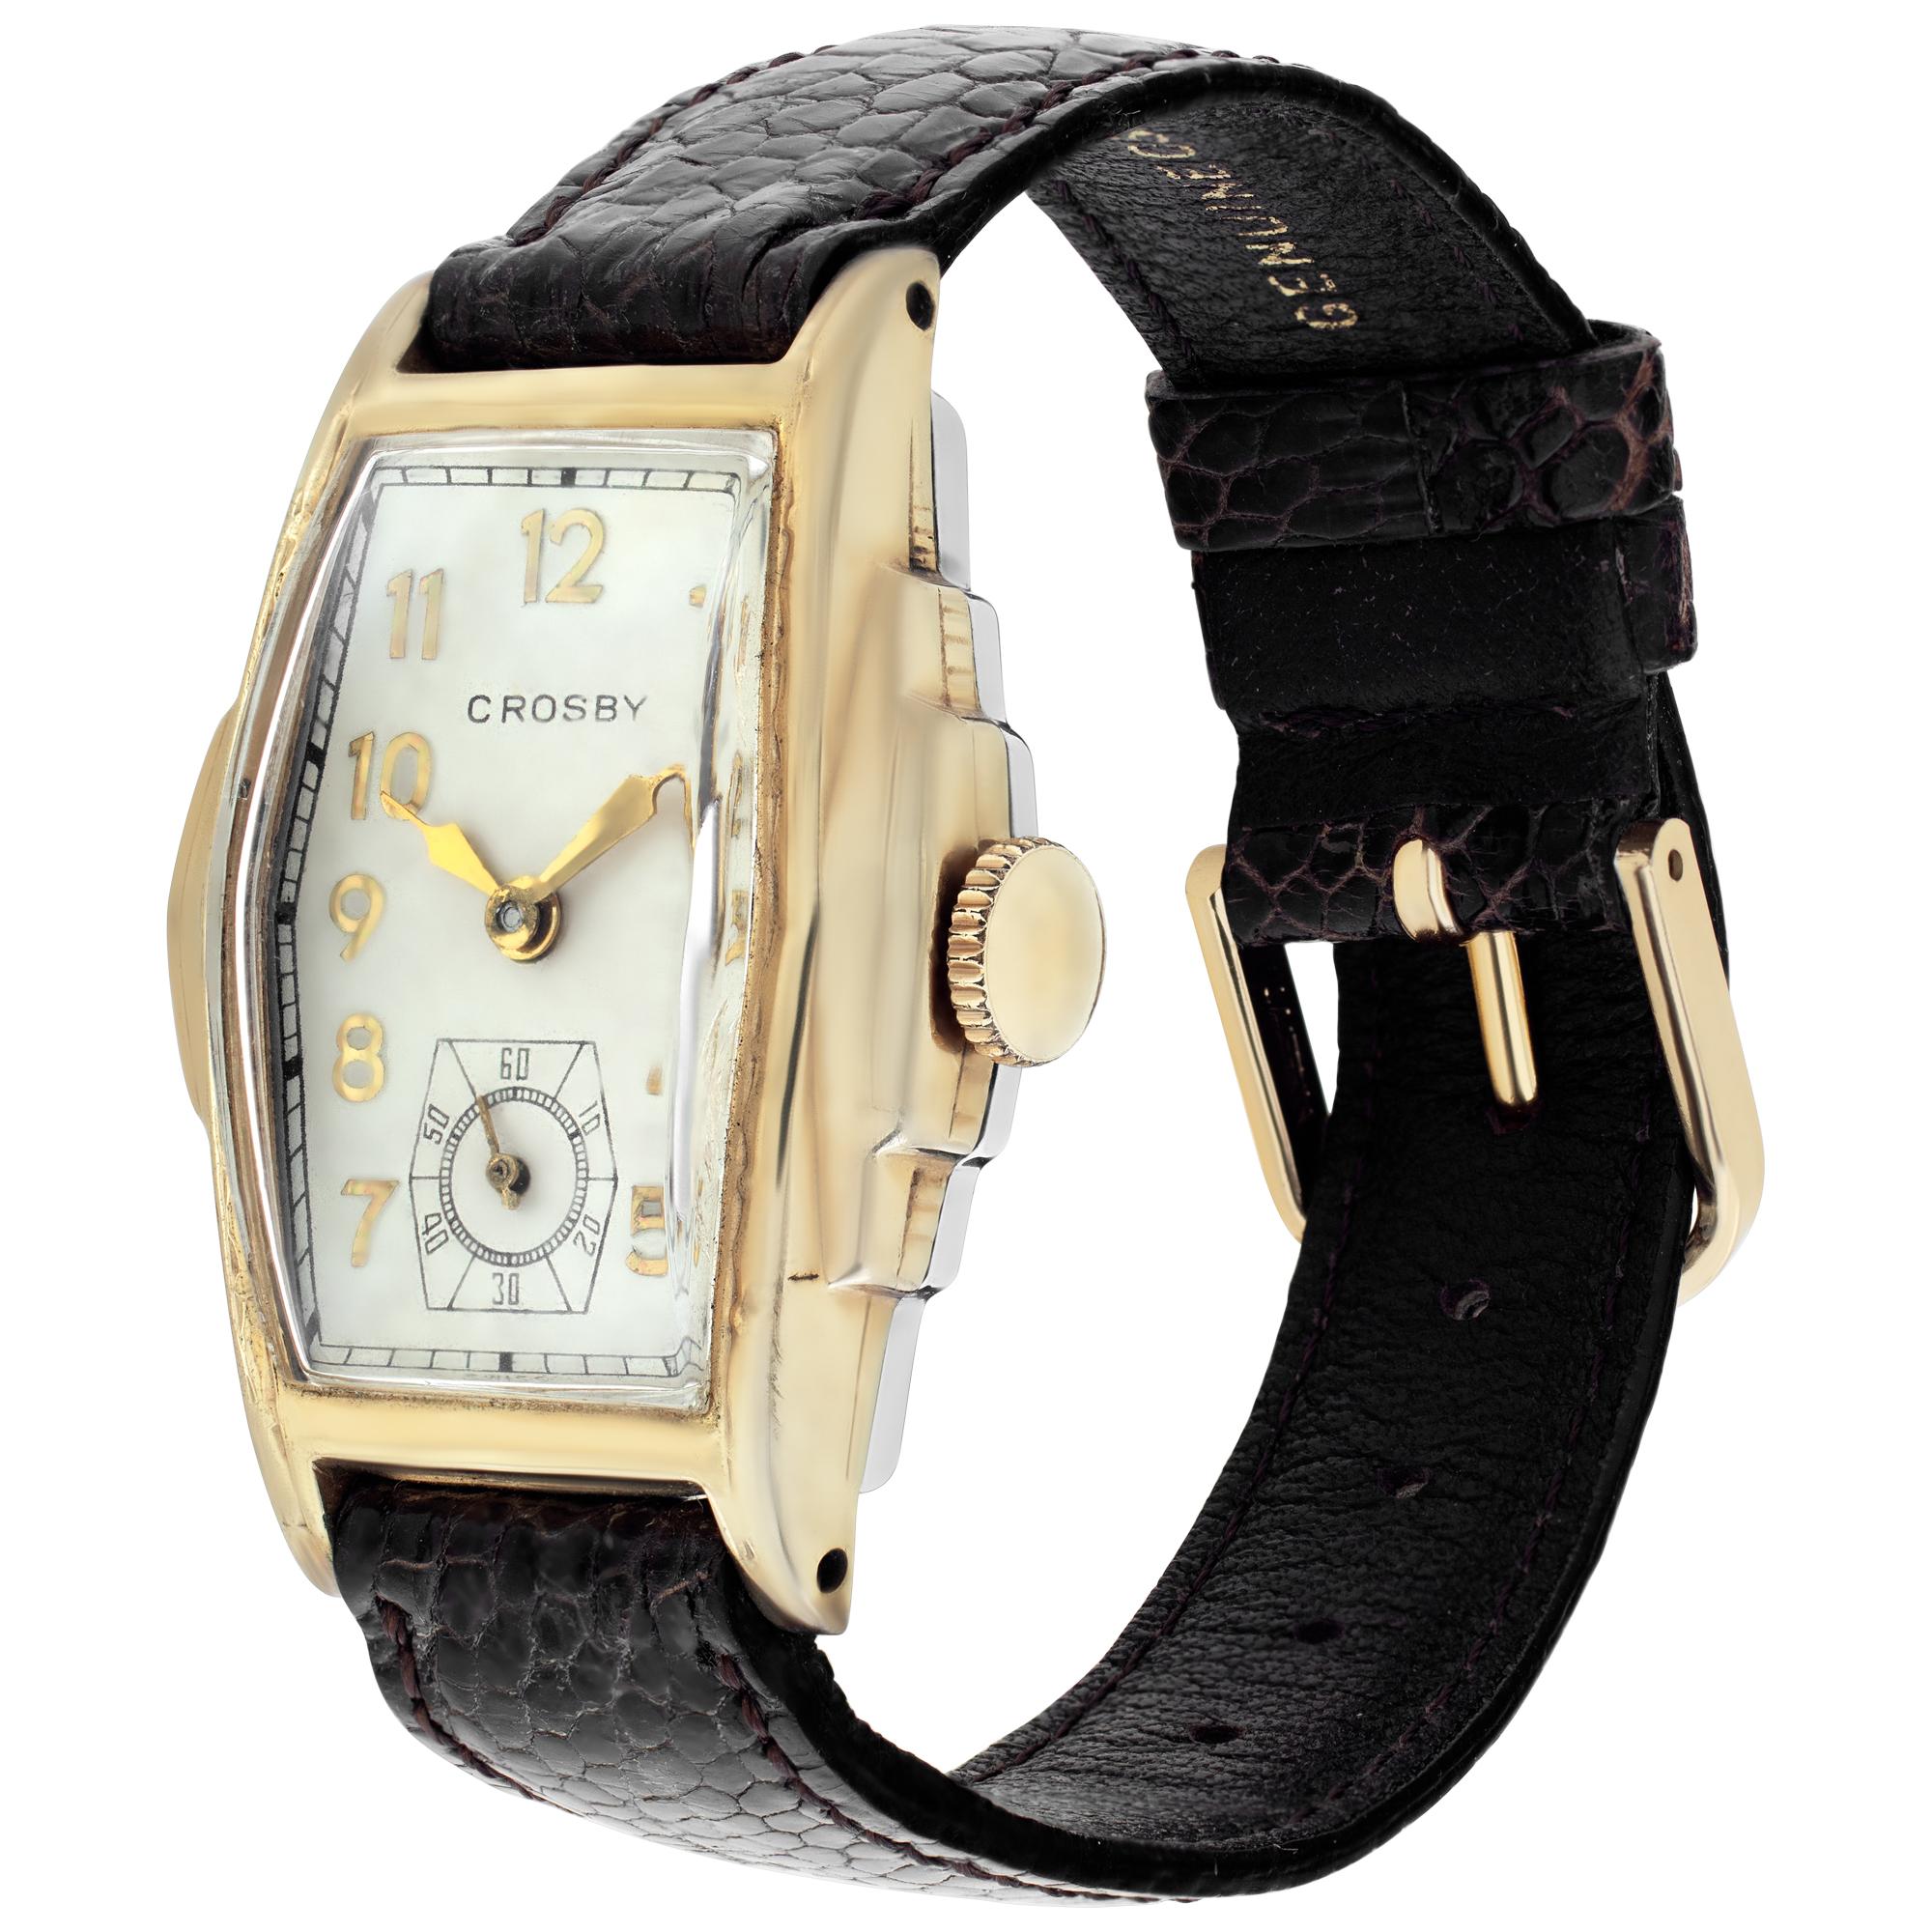 Unisex Crosby gold fill case, gold fill bezel, leather leather band with two piece clasp. Subsidary seconds Manual Certified pre-owned. Circa 1950 Fine Pre-owned Crosby Watch. Certified preowned Vintage Crosby watch on a Brown Leather band with a